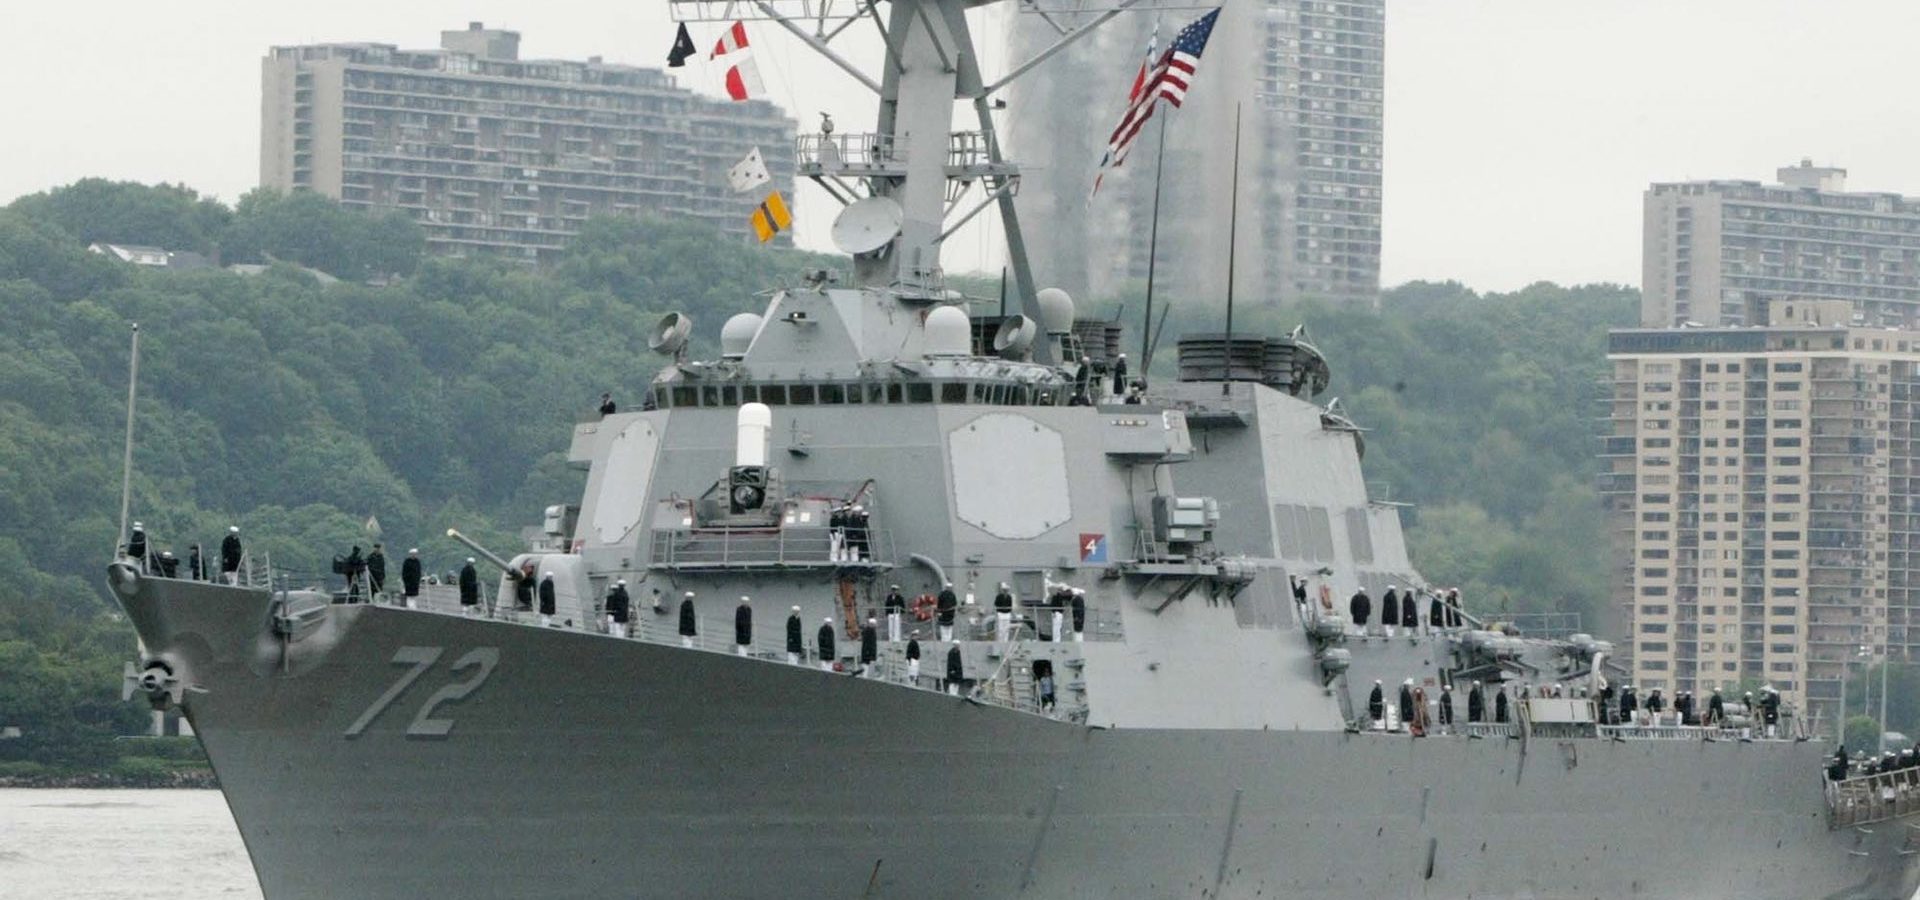 The USS Mahan, a guided-missile destroyer, moves up the Hudson River in New York. (Photo: Ed Bailey/AP)